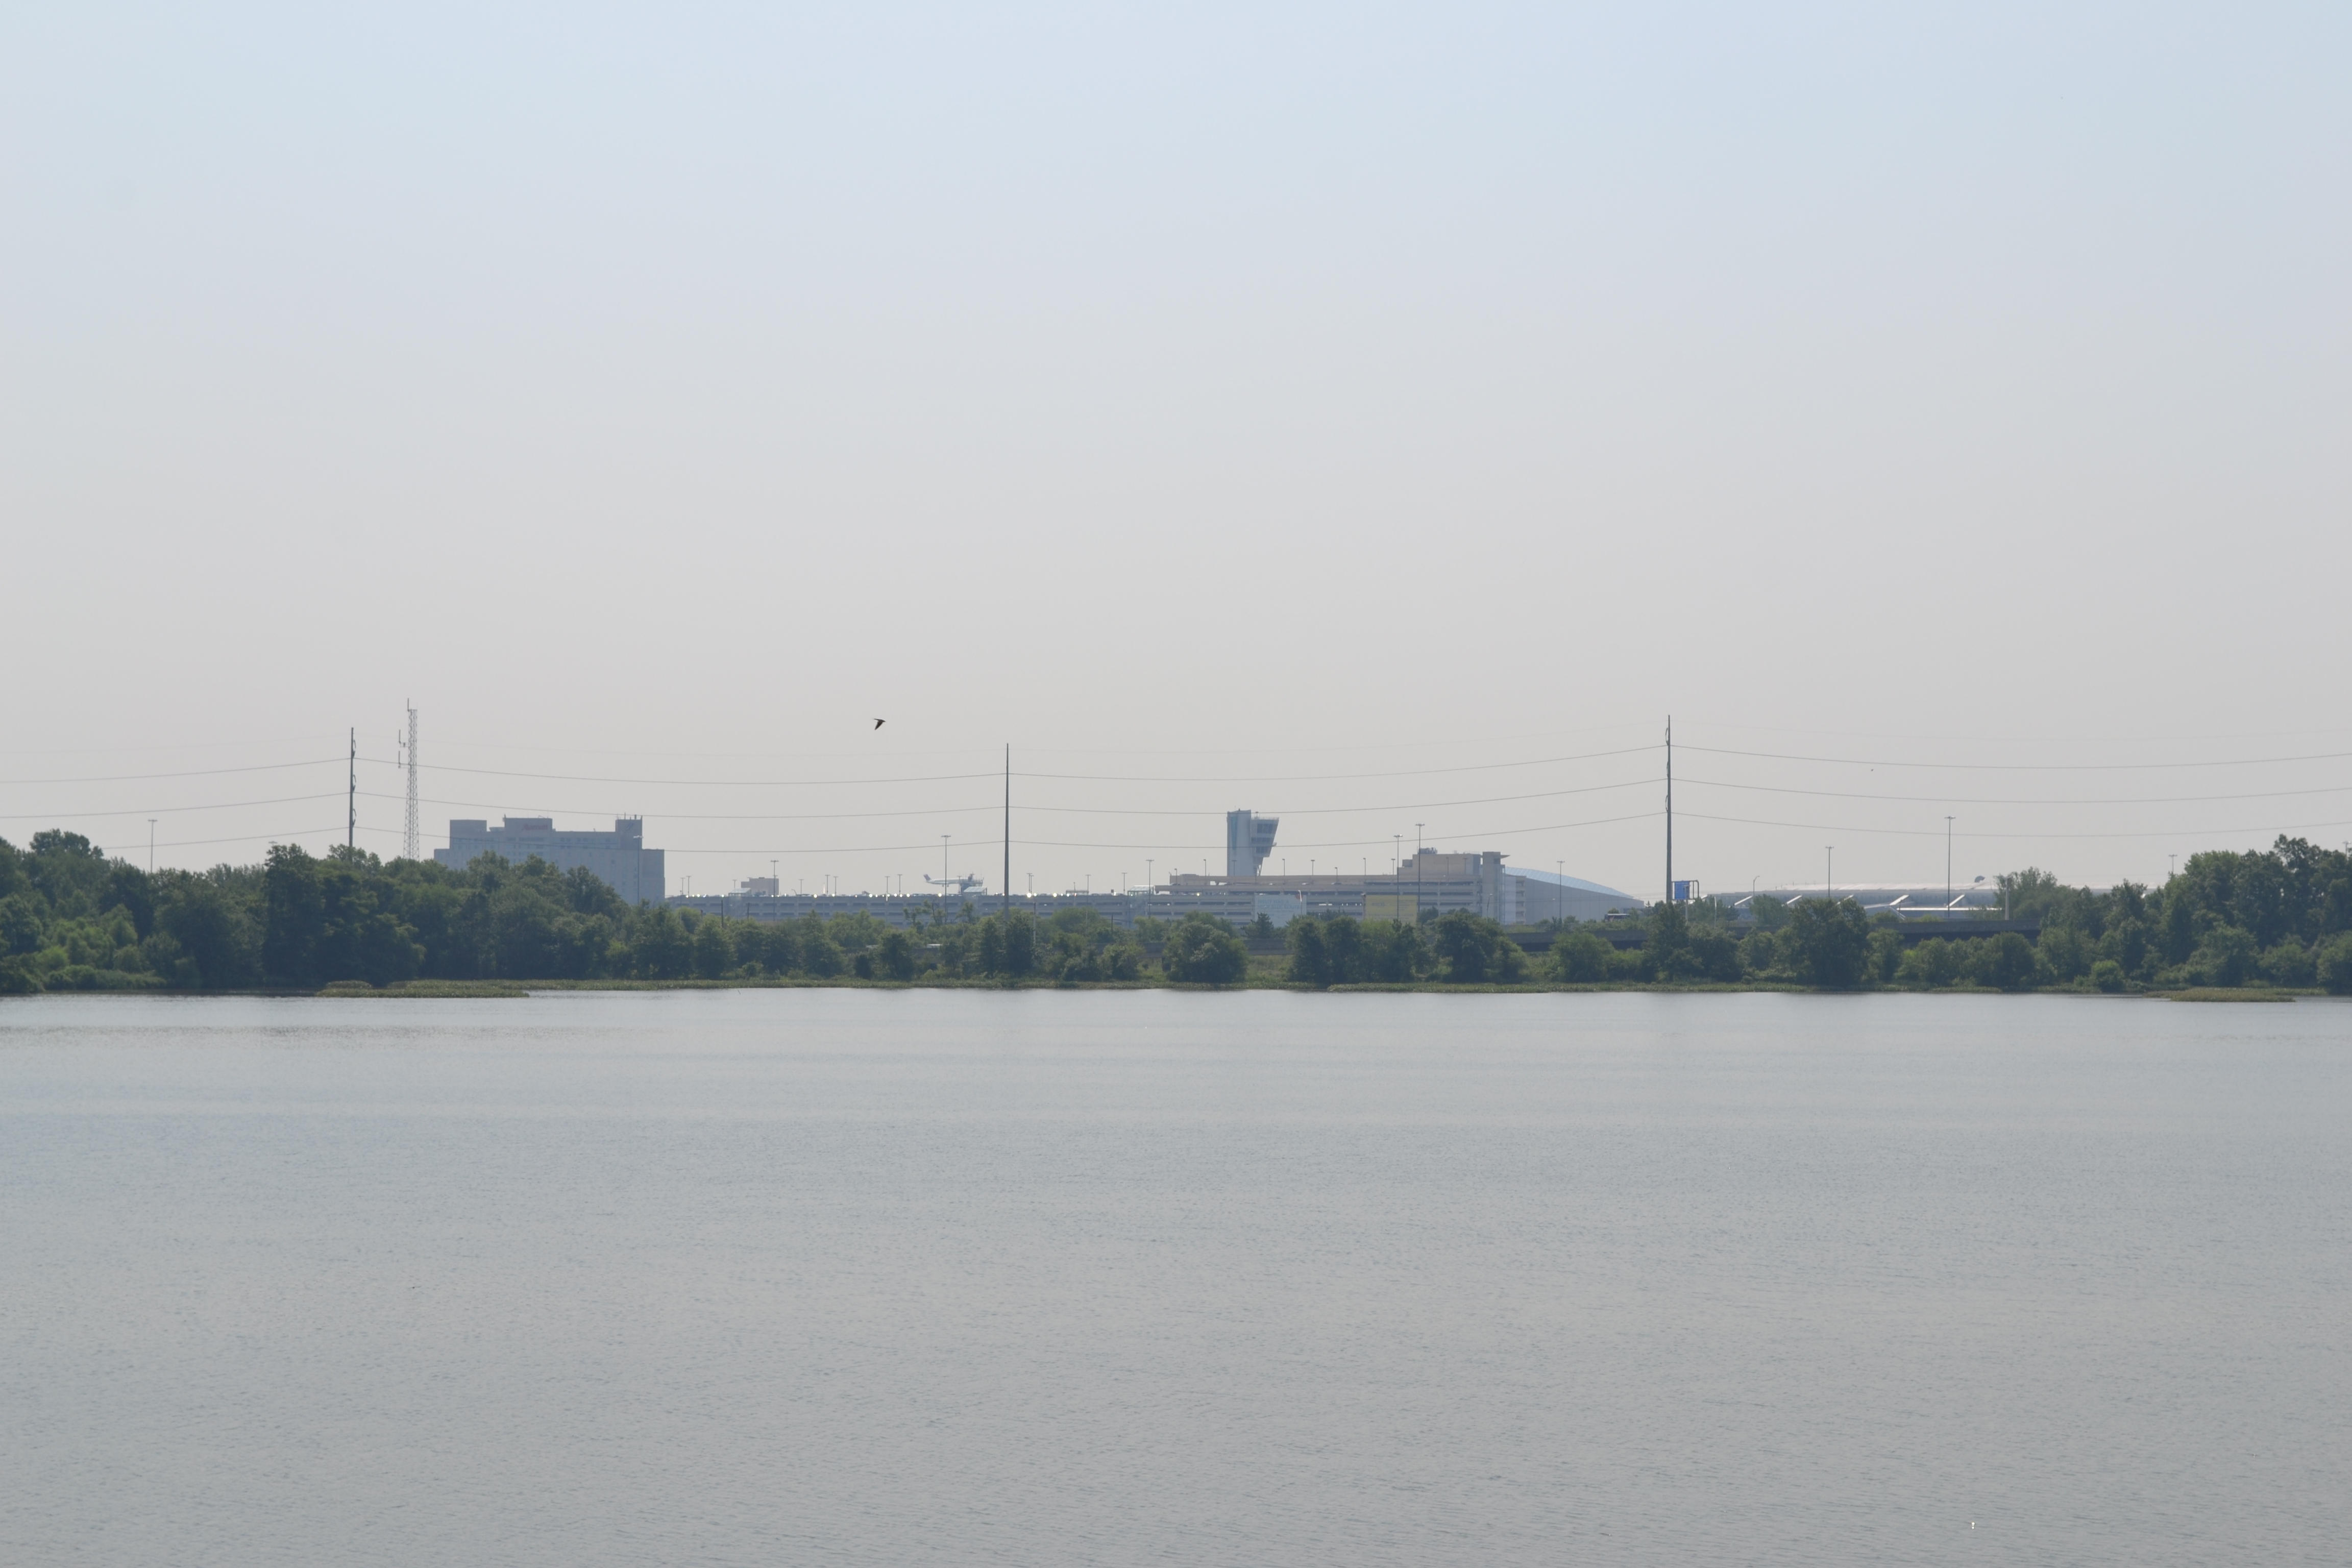 At one end of impoundment the Philadelphia International Airport's buildings stand above the tree line 